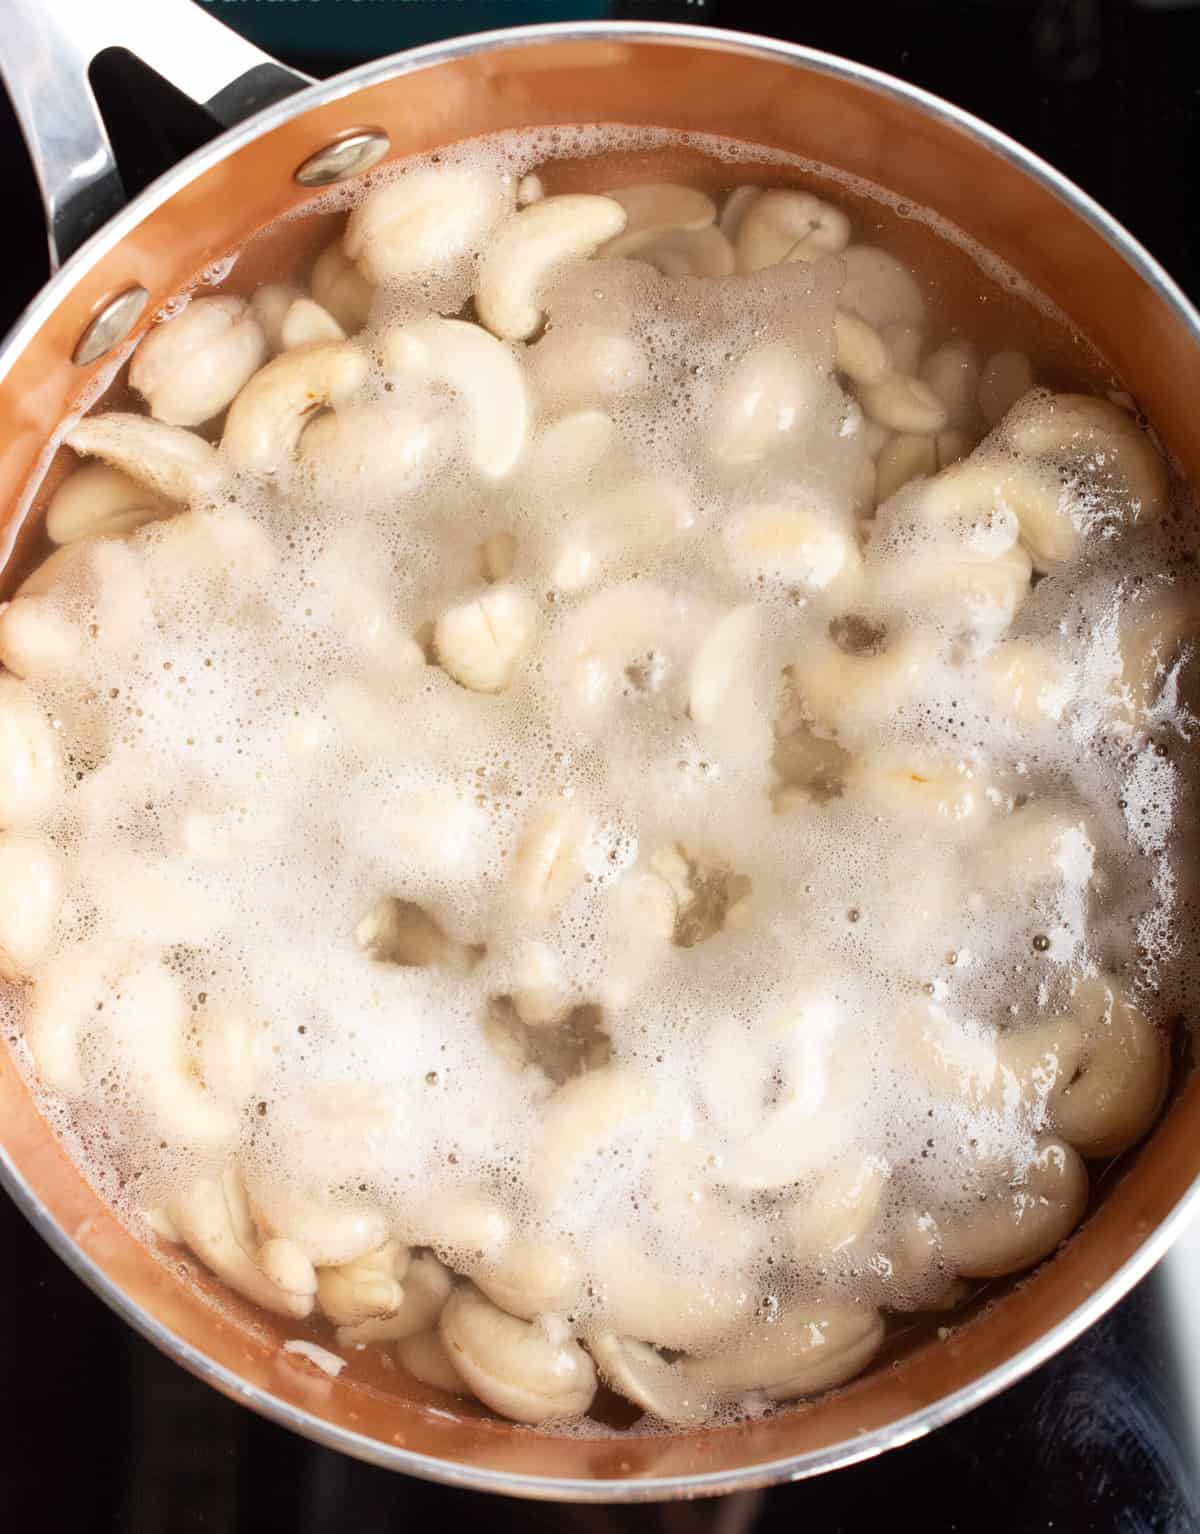 Raw cashews in a pot of boiling water to soften.